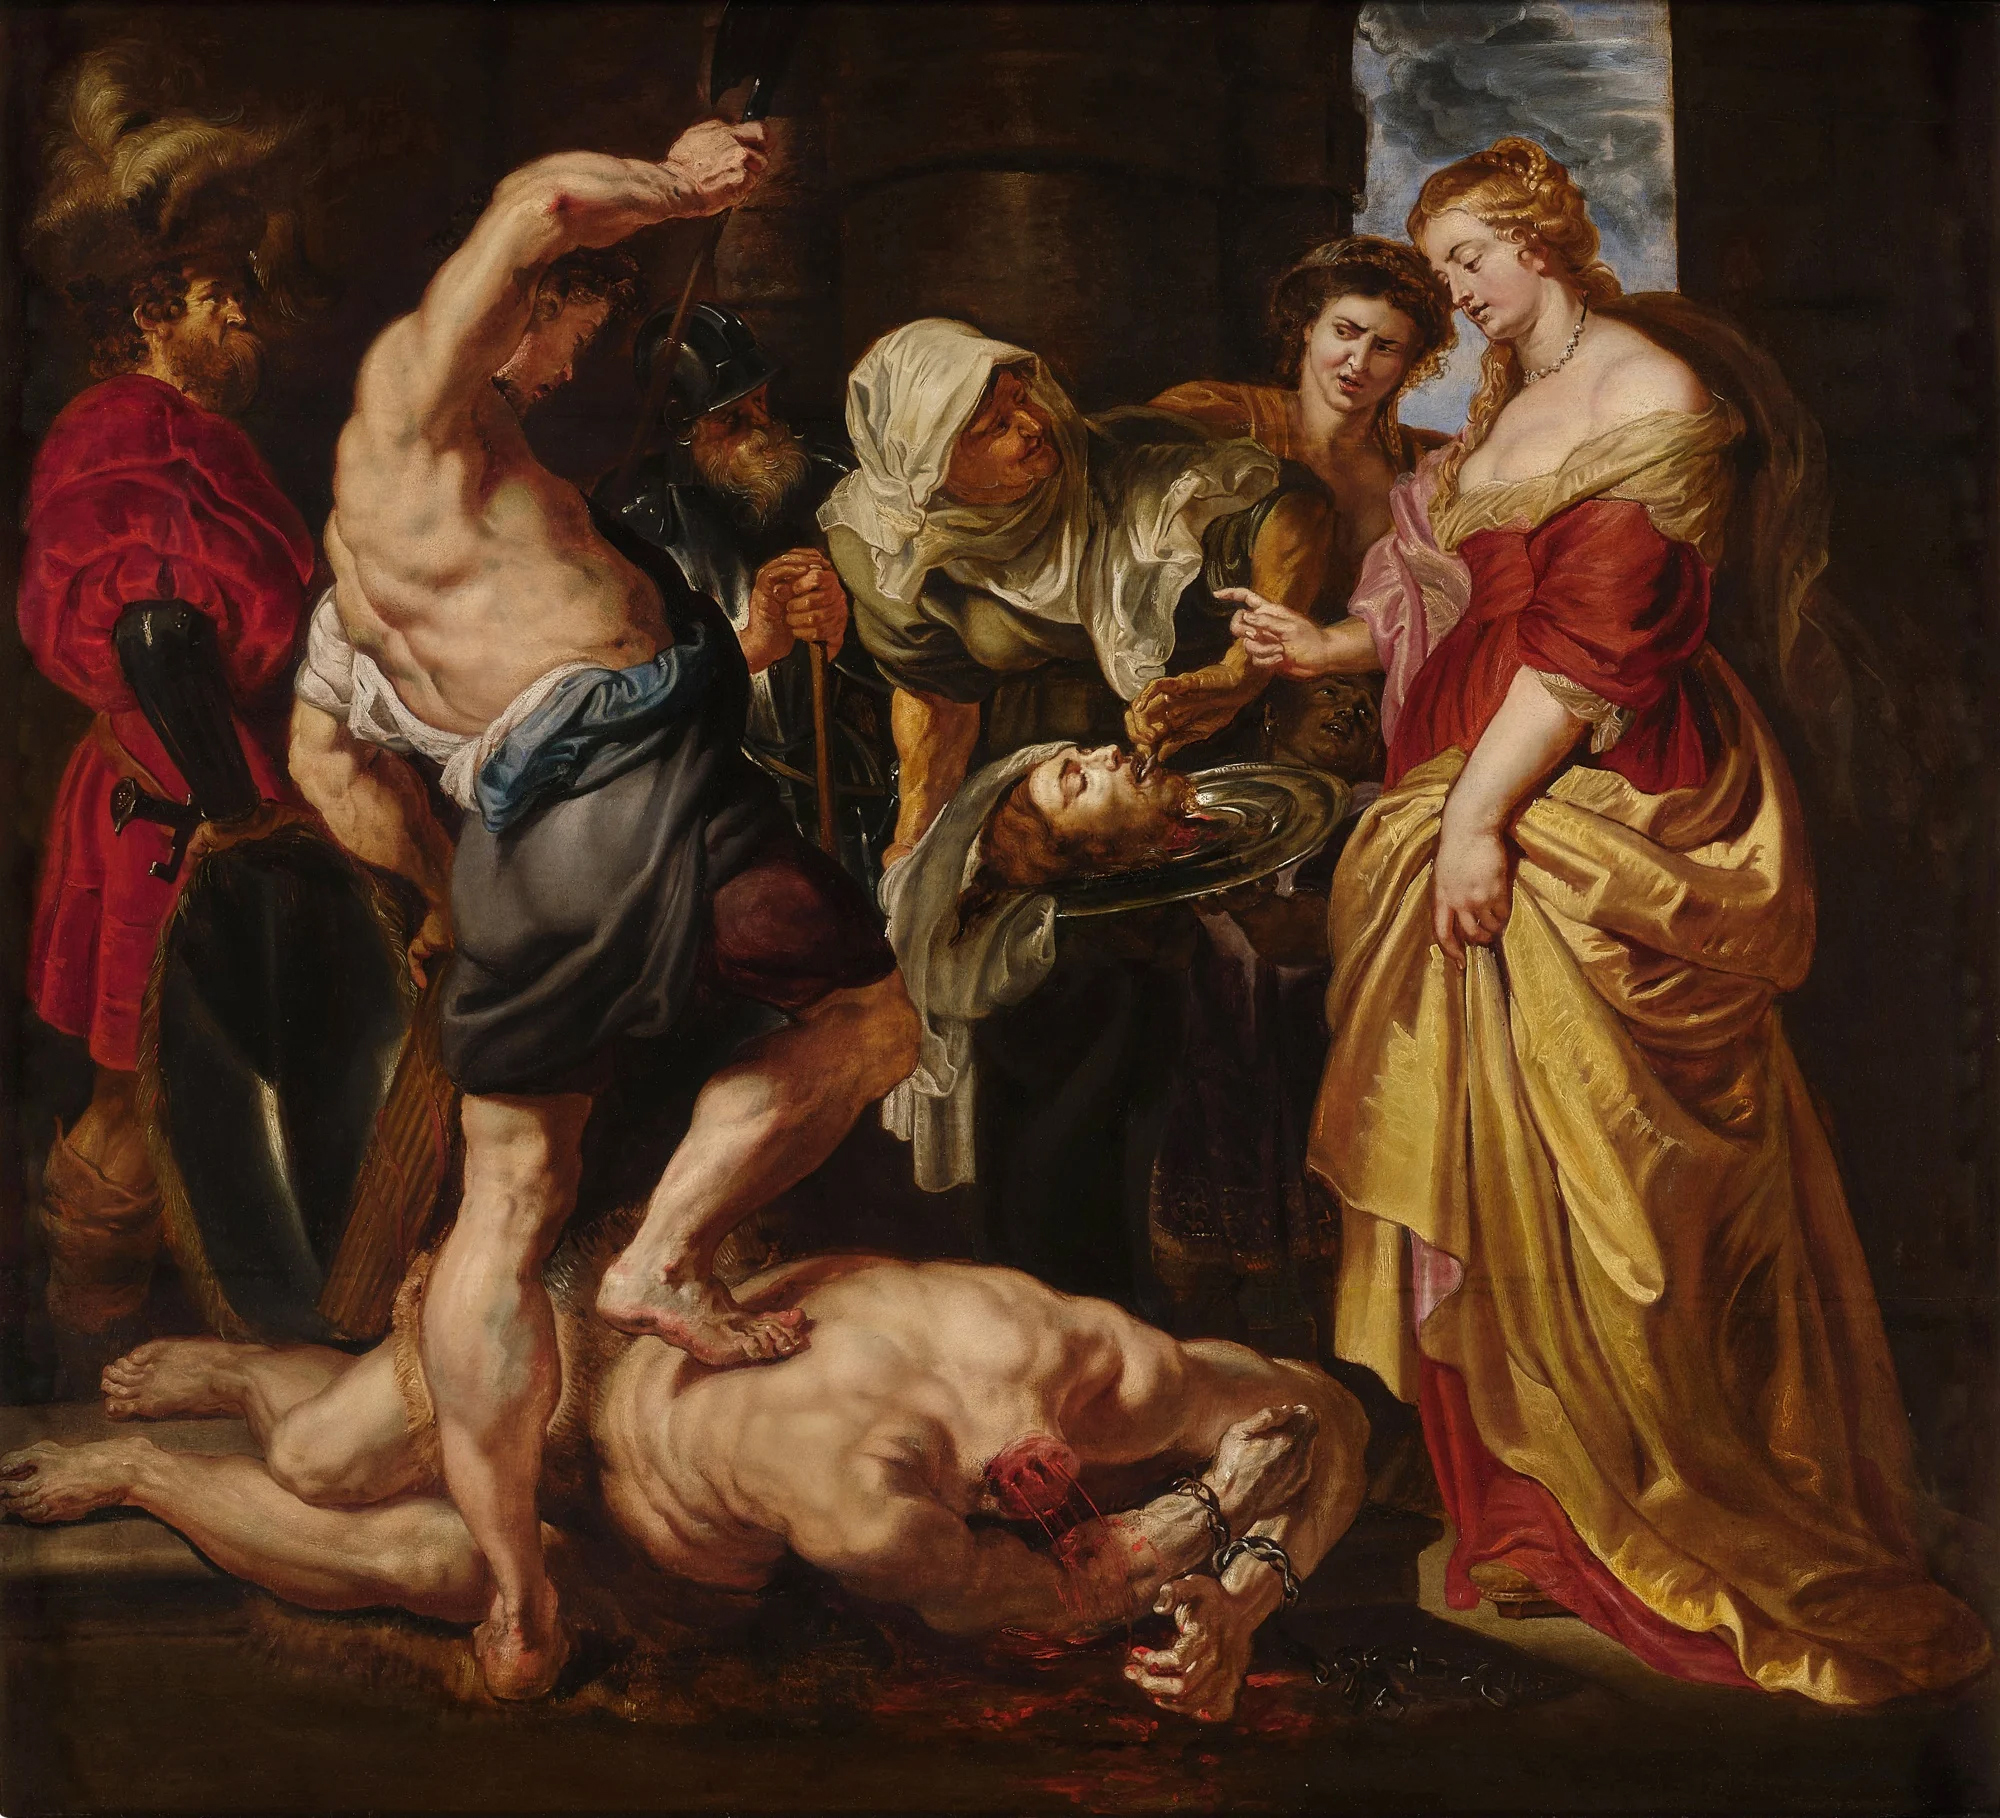 Peter Paul RUBENS (1577-1640) Salome Presented With the Head of John the Baptist (1609)